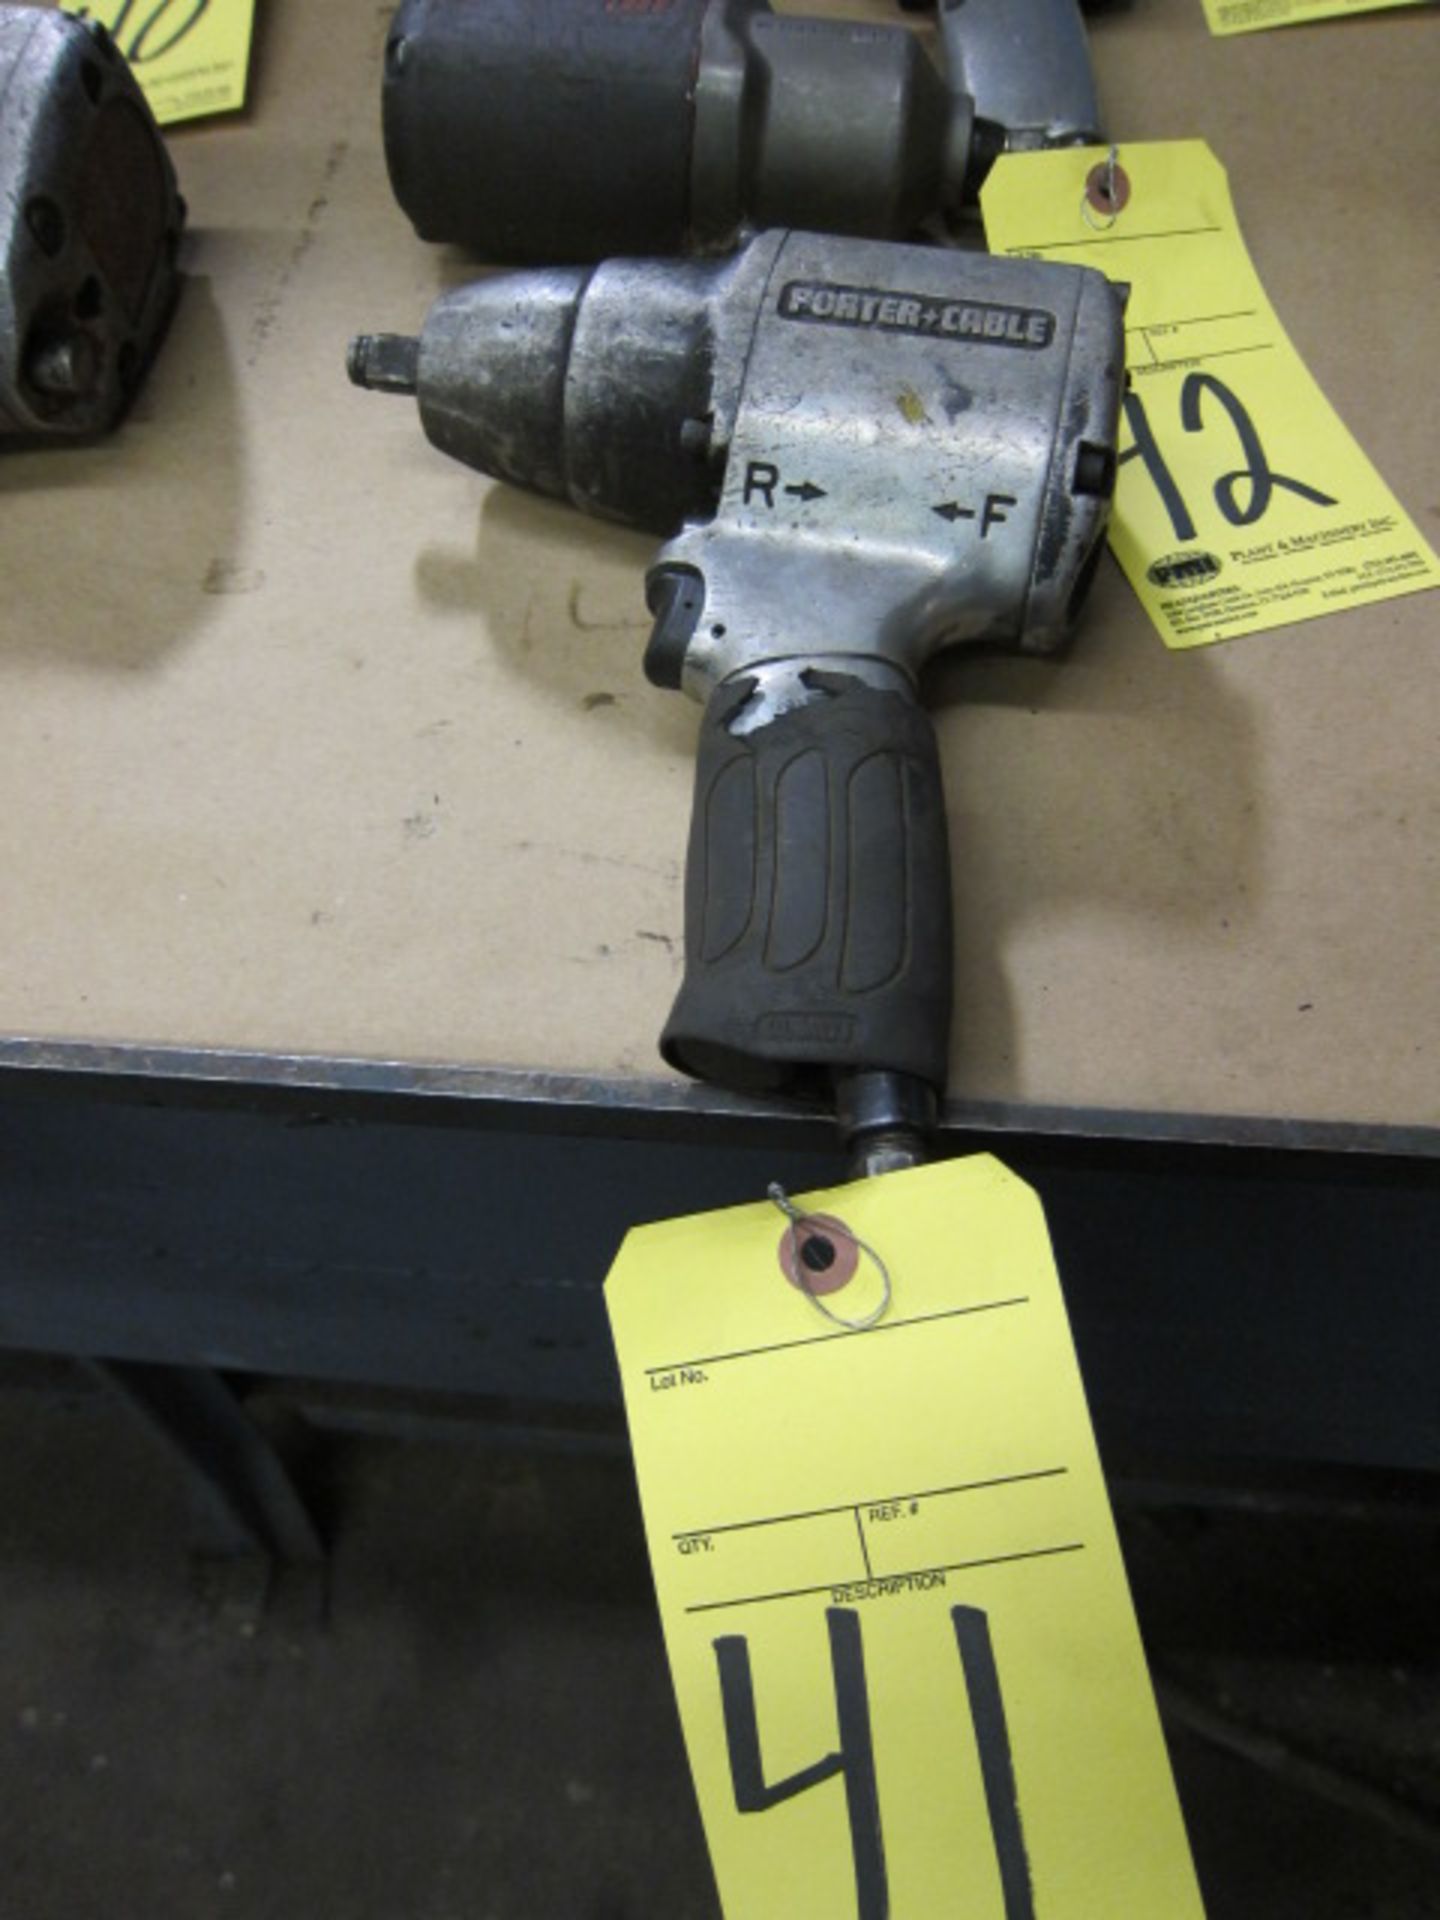 AIR IMPACT WRENCH, PORTER CABLE